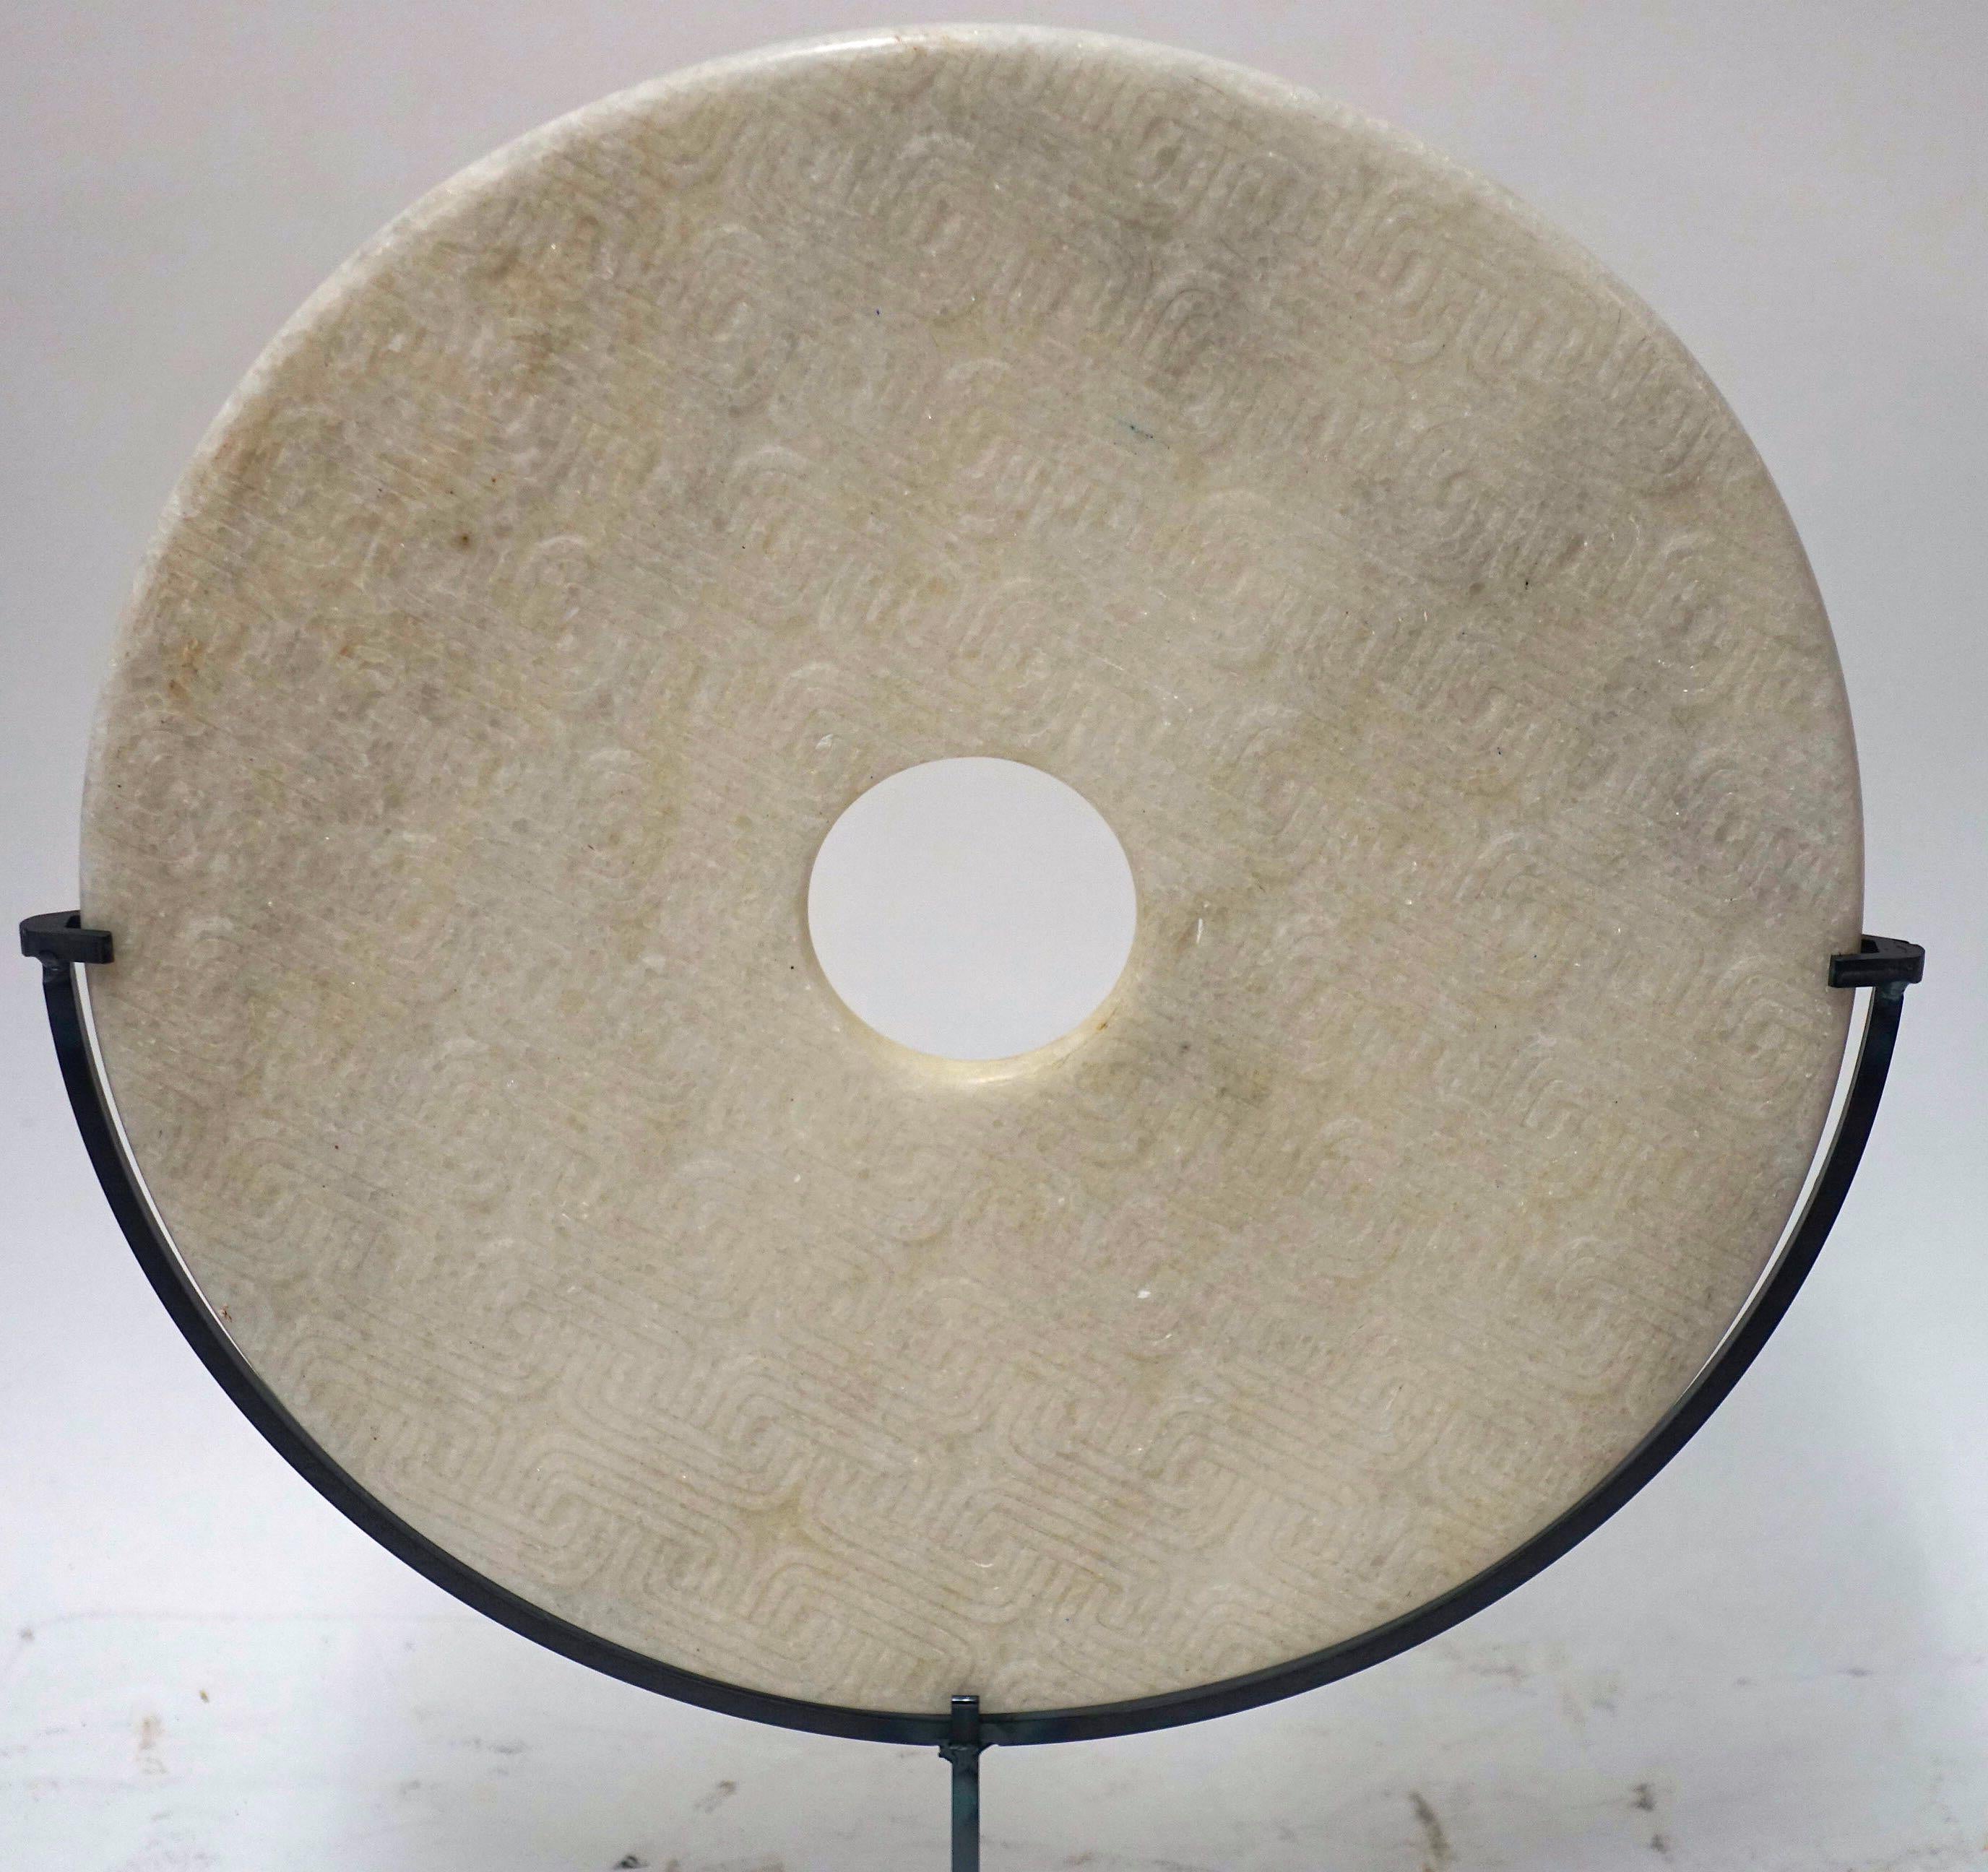 Contemporary Chinese off-white textured marble disc sculpture
Stand measures 7